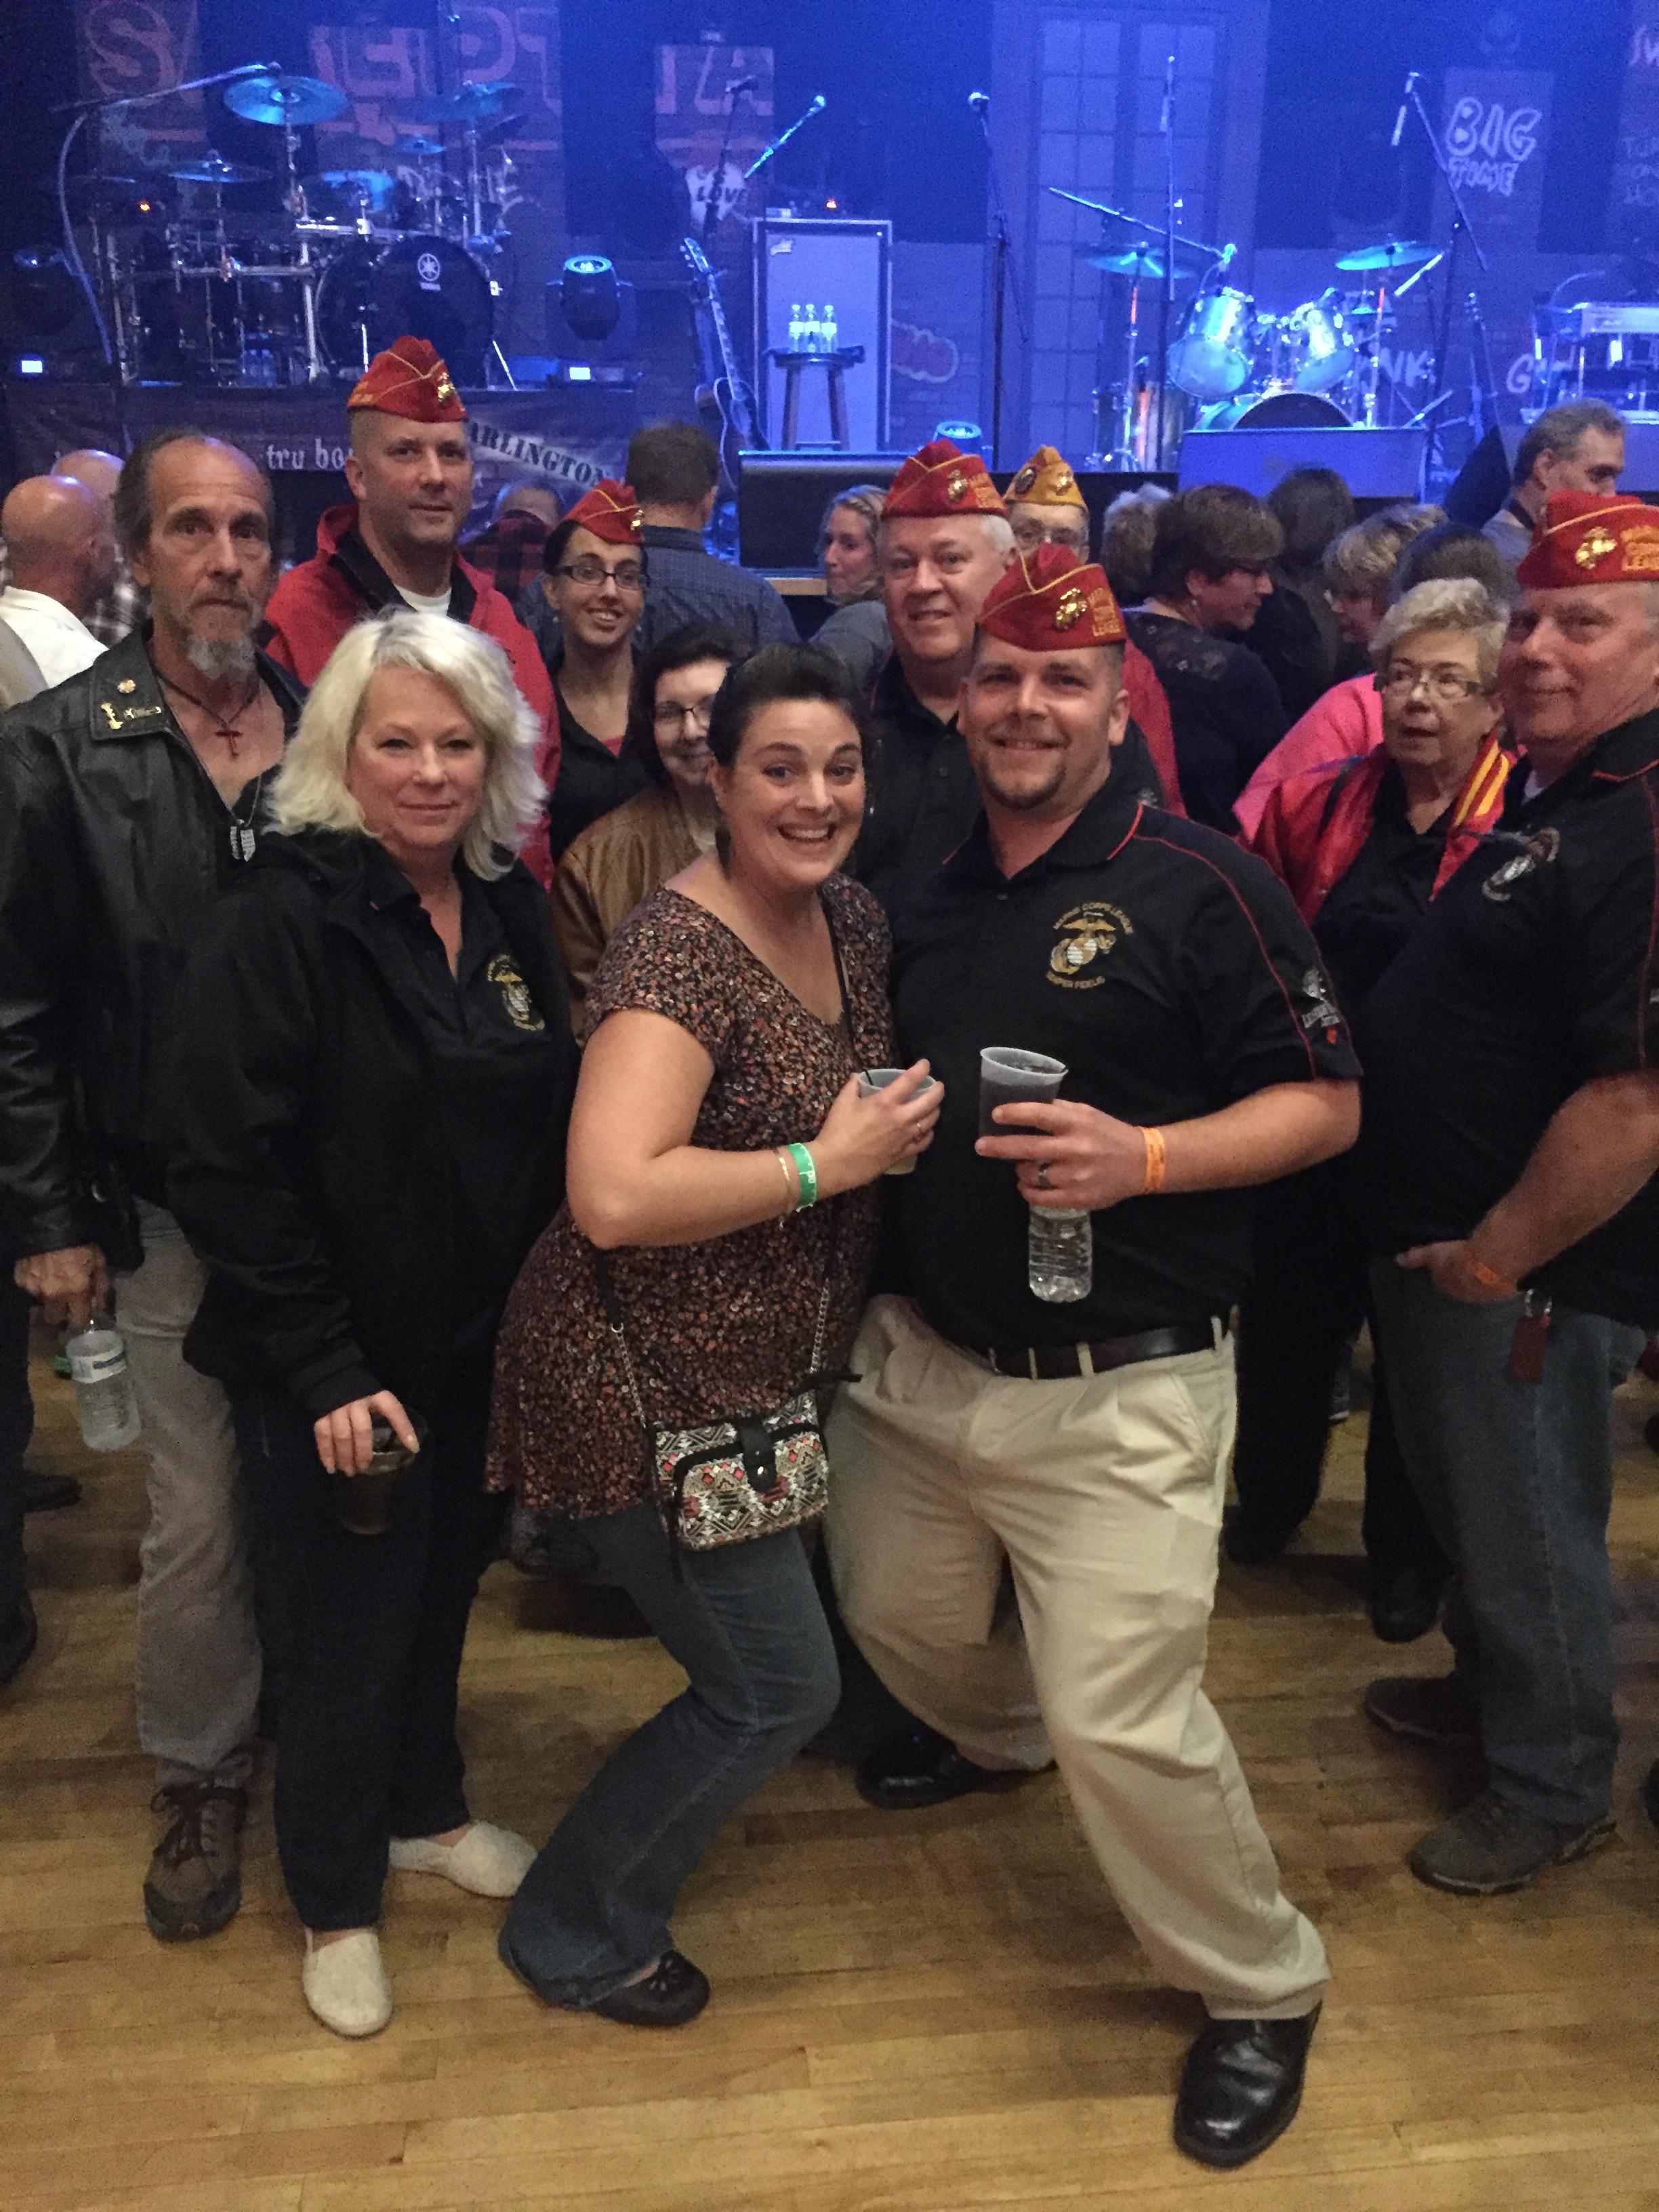  Detachment members and their spouses attended a Trace Adkins concert, in which they presented Mr. Adkins with a detachment polo shirt. 